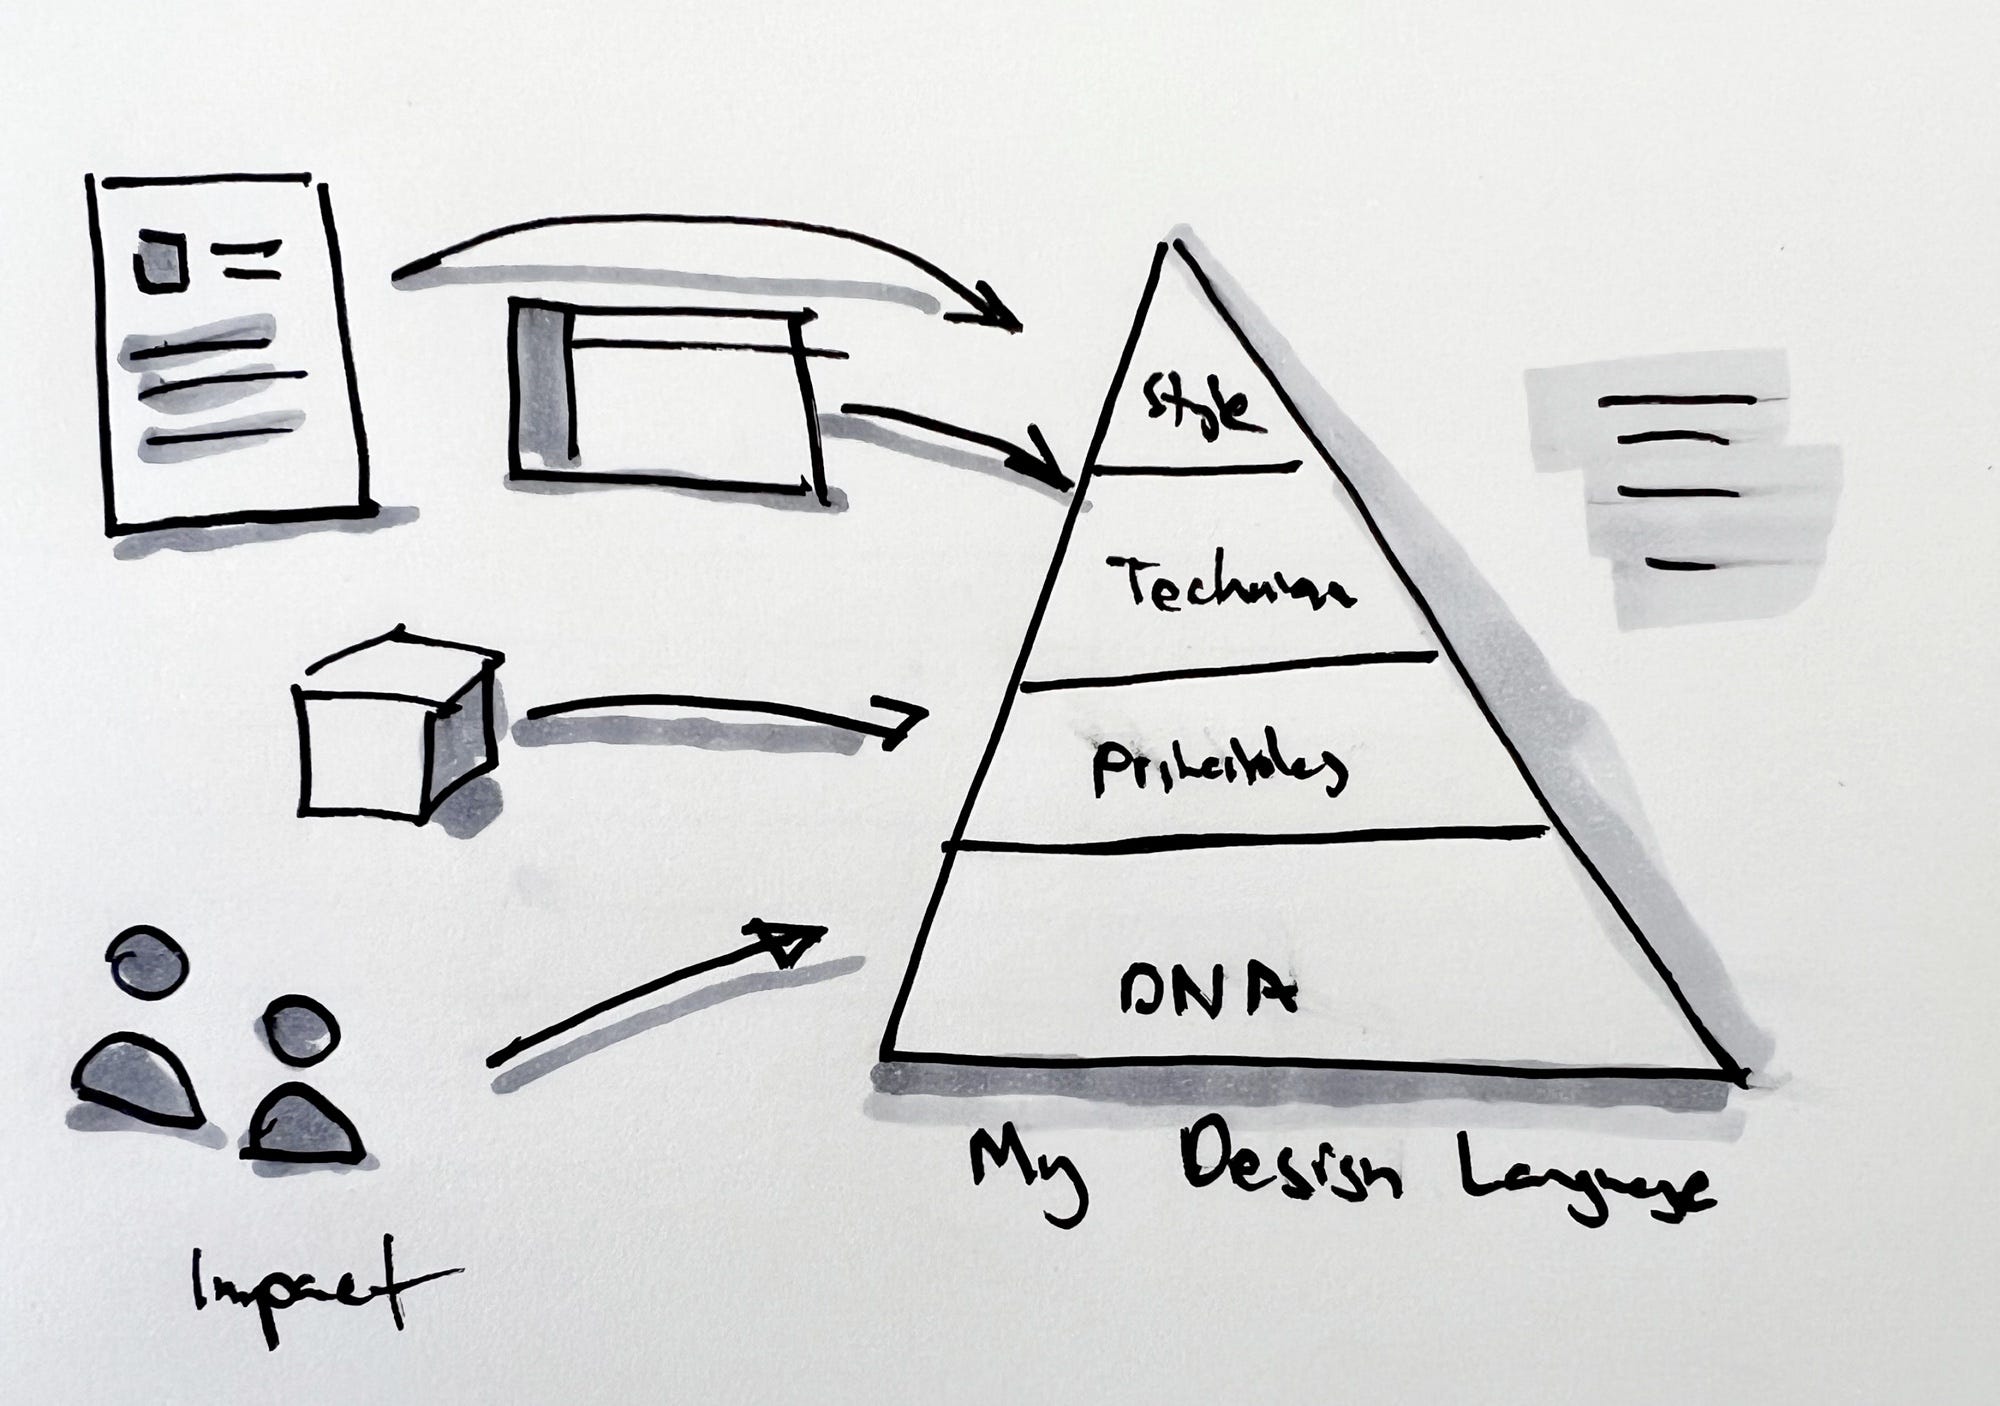 Drawing of paper, figma files, boxes, and people that are fed into a pyramid